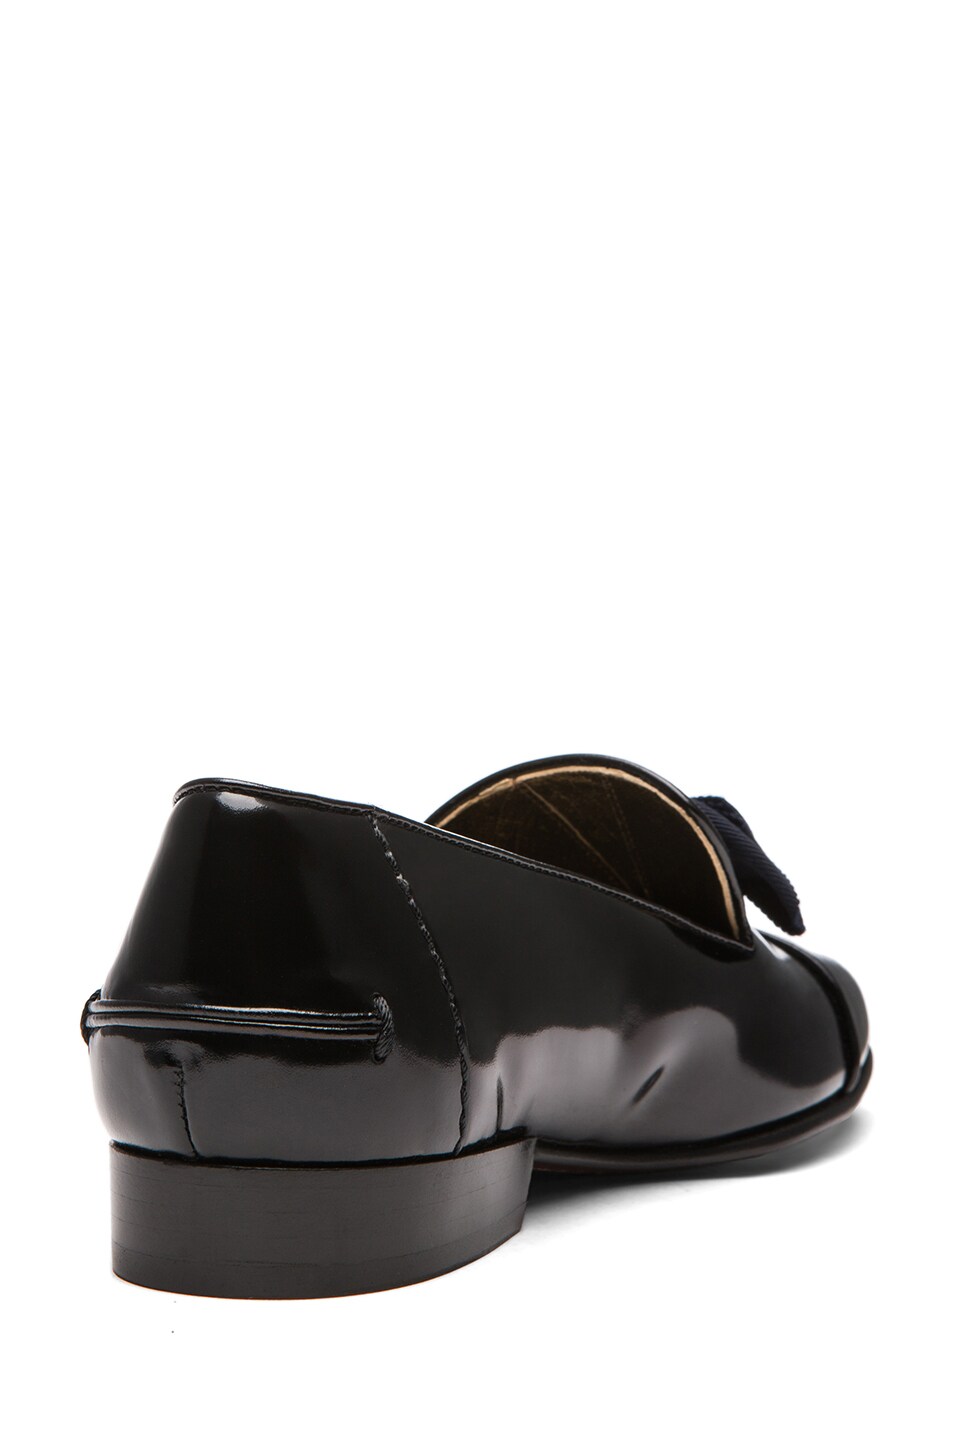 Lanvin Glossy Leather Ribbon Lace Oxfords in Noir | FWRD